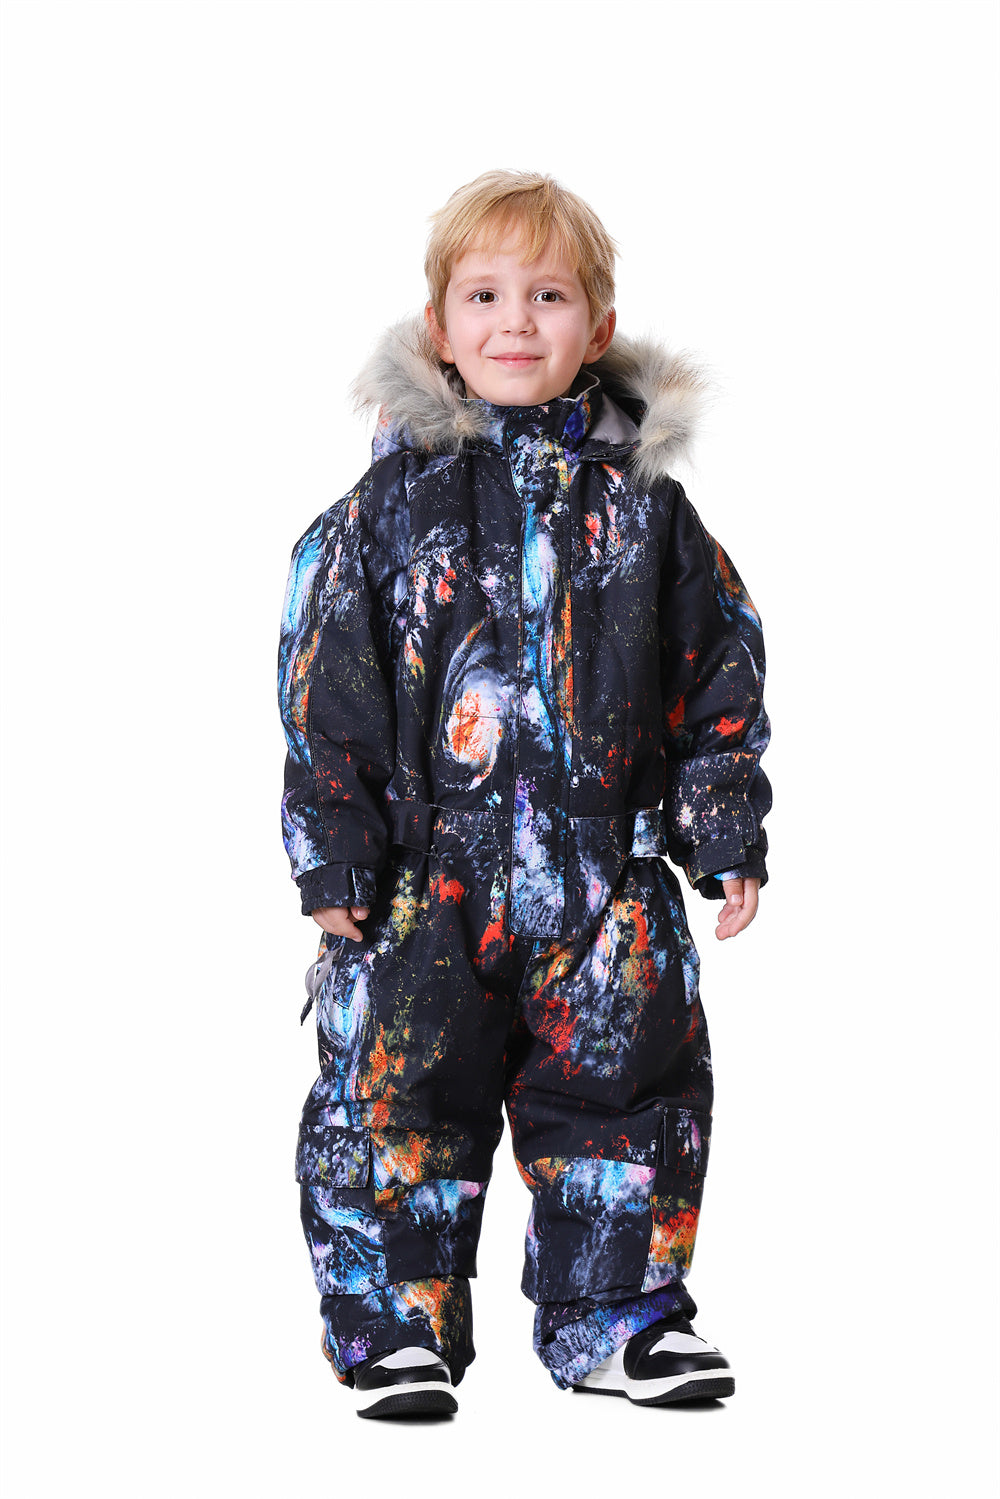 Baby Winter Fleece Jumpsuit With Hood Girls Boys Snowsuits Warm Rompers  Outfits, 120cm 